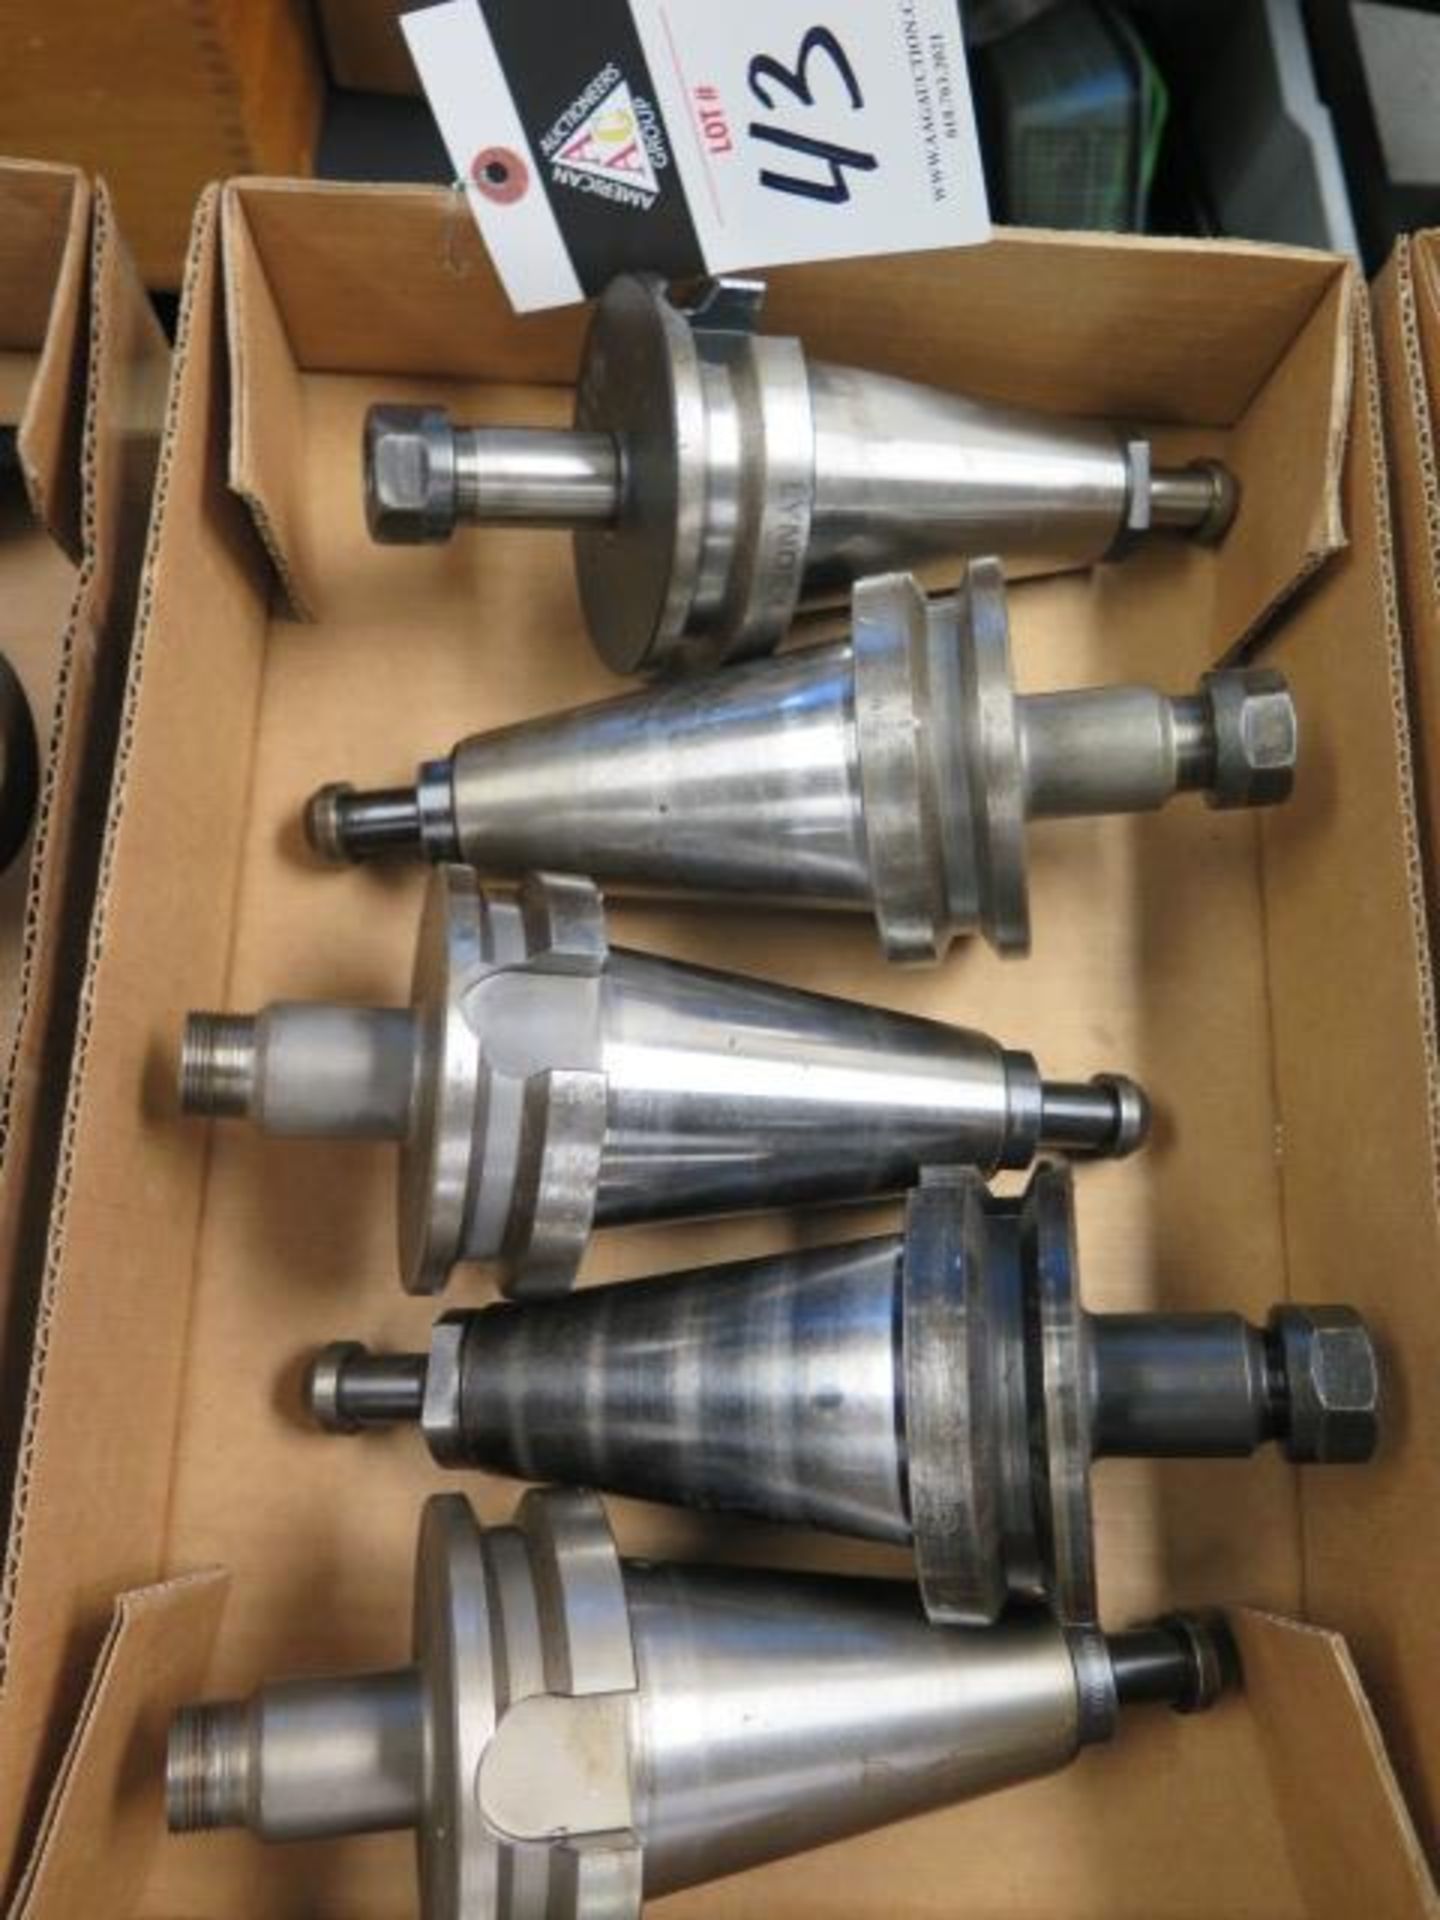 BT-50 Taper ER20 Collet Chucks (5) (SOLD AS-IS - NO WARRANTY) (Located @ 2229 Ringwood Ave. San Jose